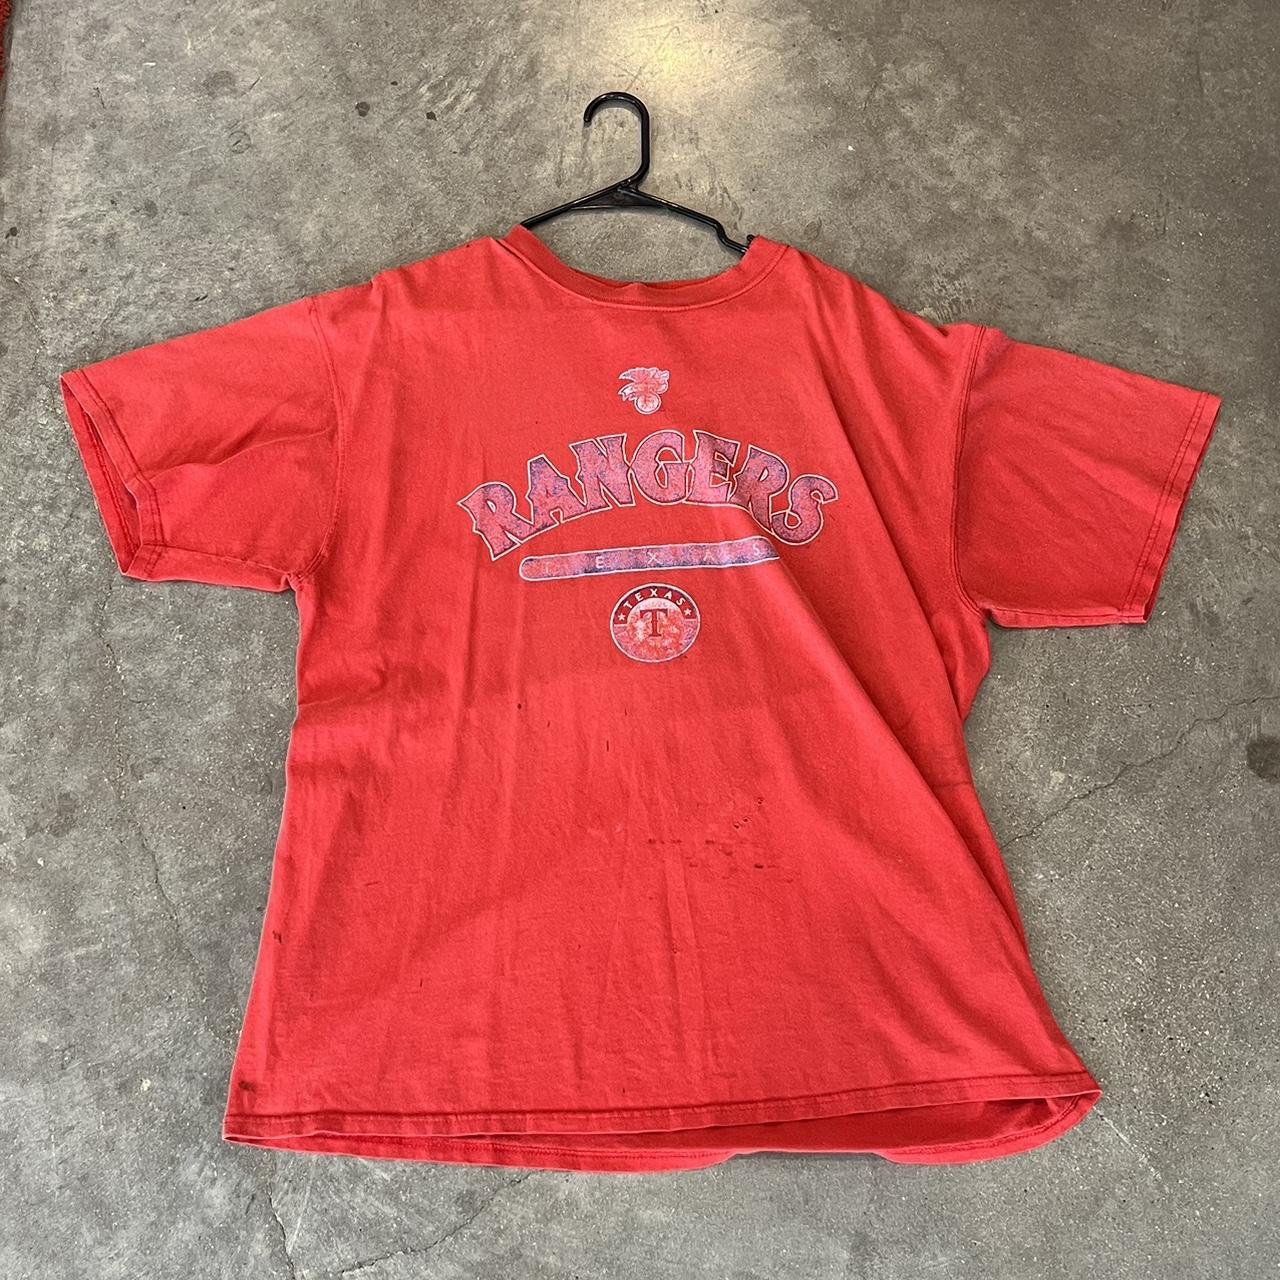 Lee Texas Ranger Tee Great condition Size L Dm for... - Depop